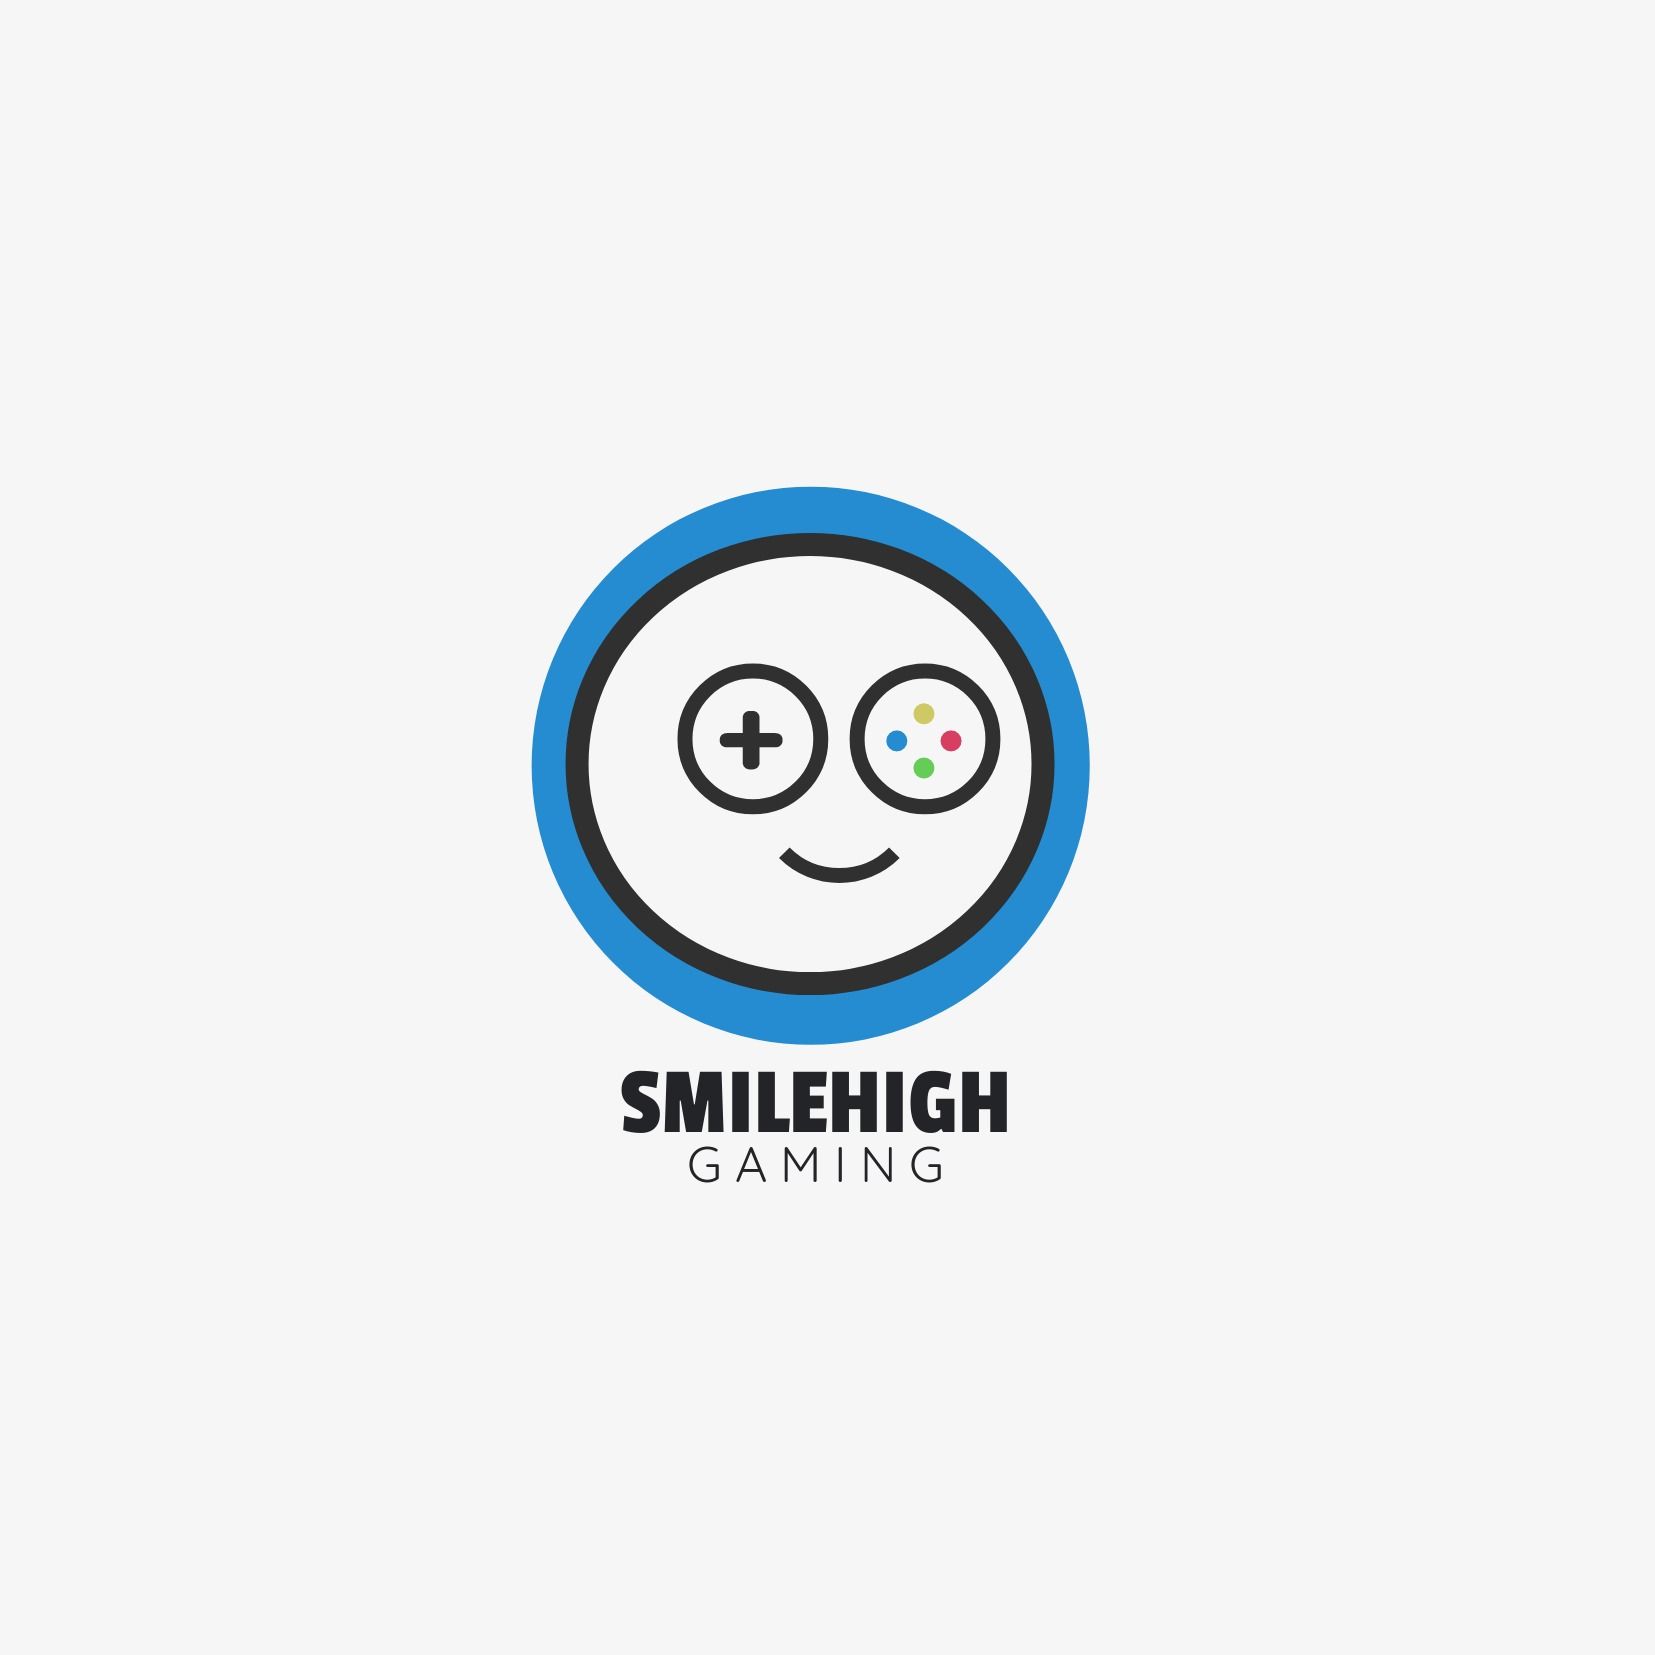 Abstract round gamepad logo that looks like a smiling face and 'Smilehigh gaming' as a title - Comparison of Passion 1 and Quick Sand fonts - Image